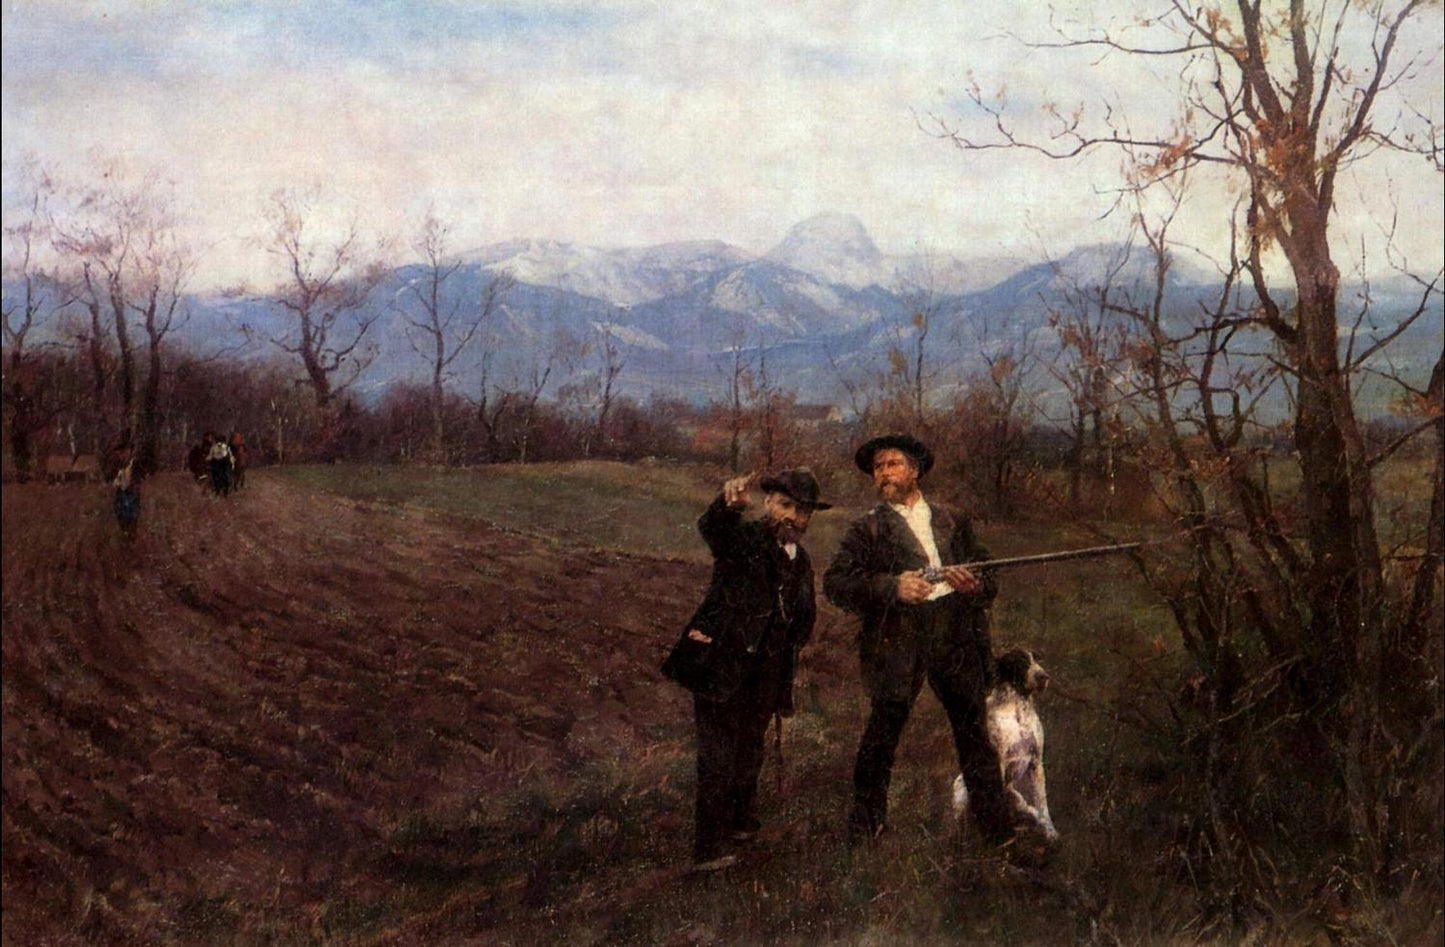 Wilhelm Leibl and Sperl on the hunt, Wilhelm Leibl